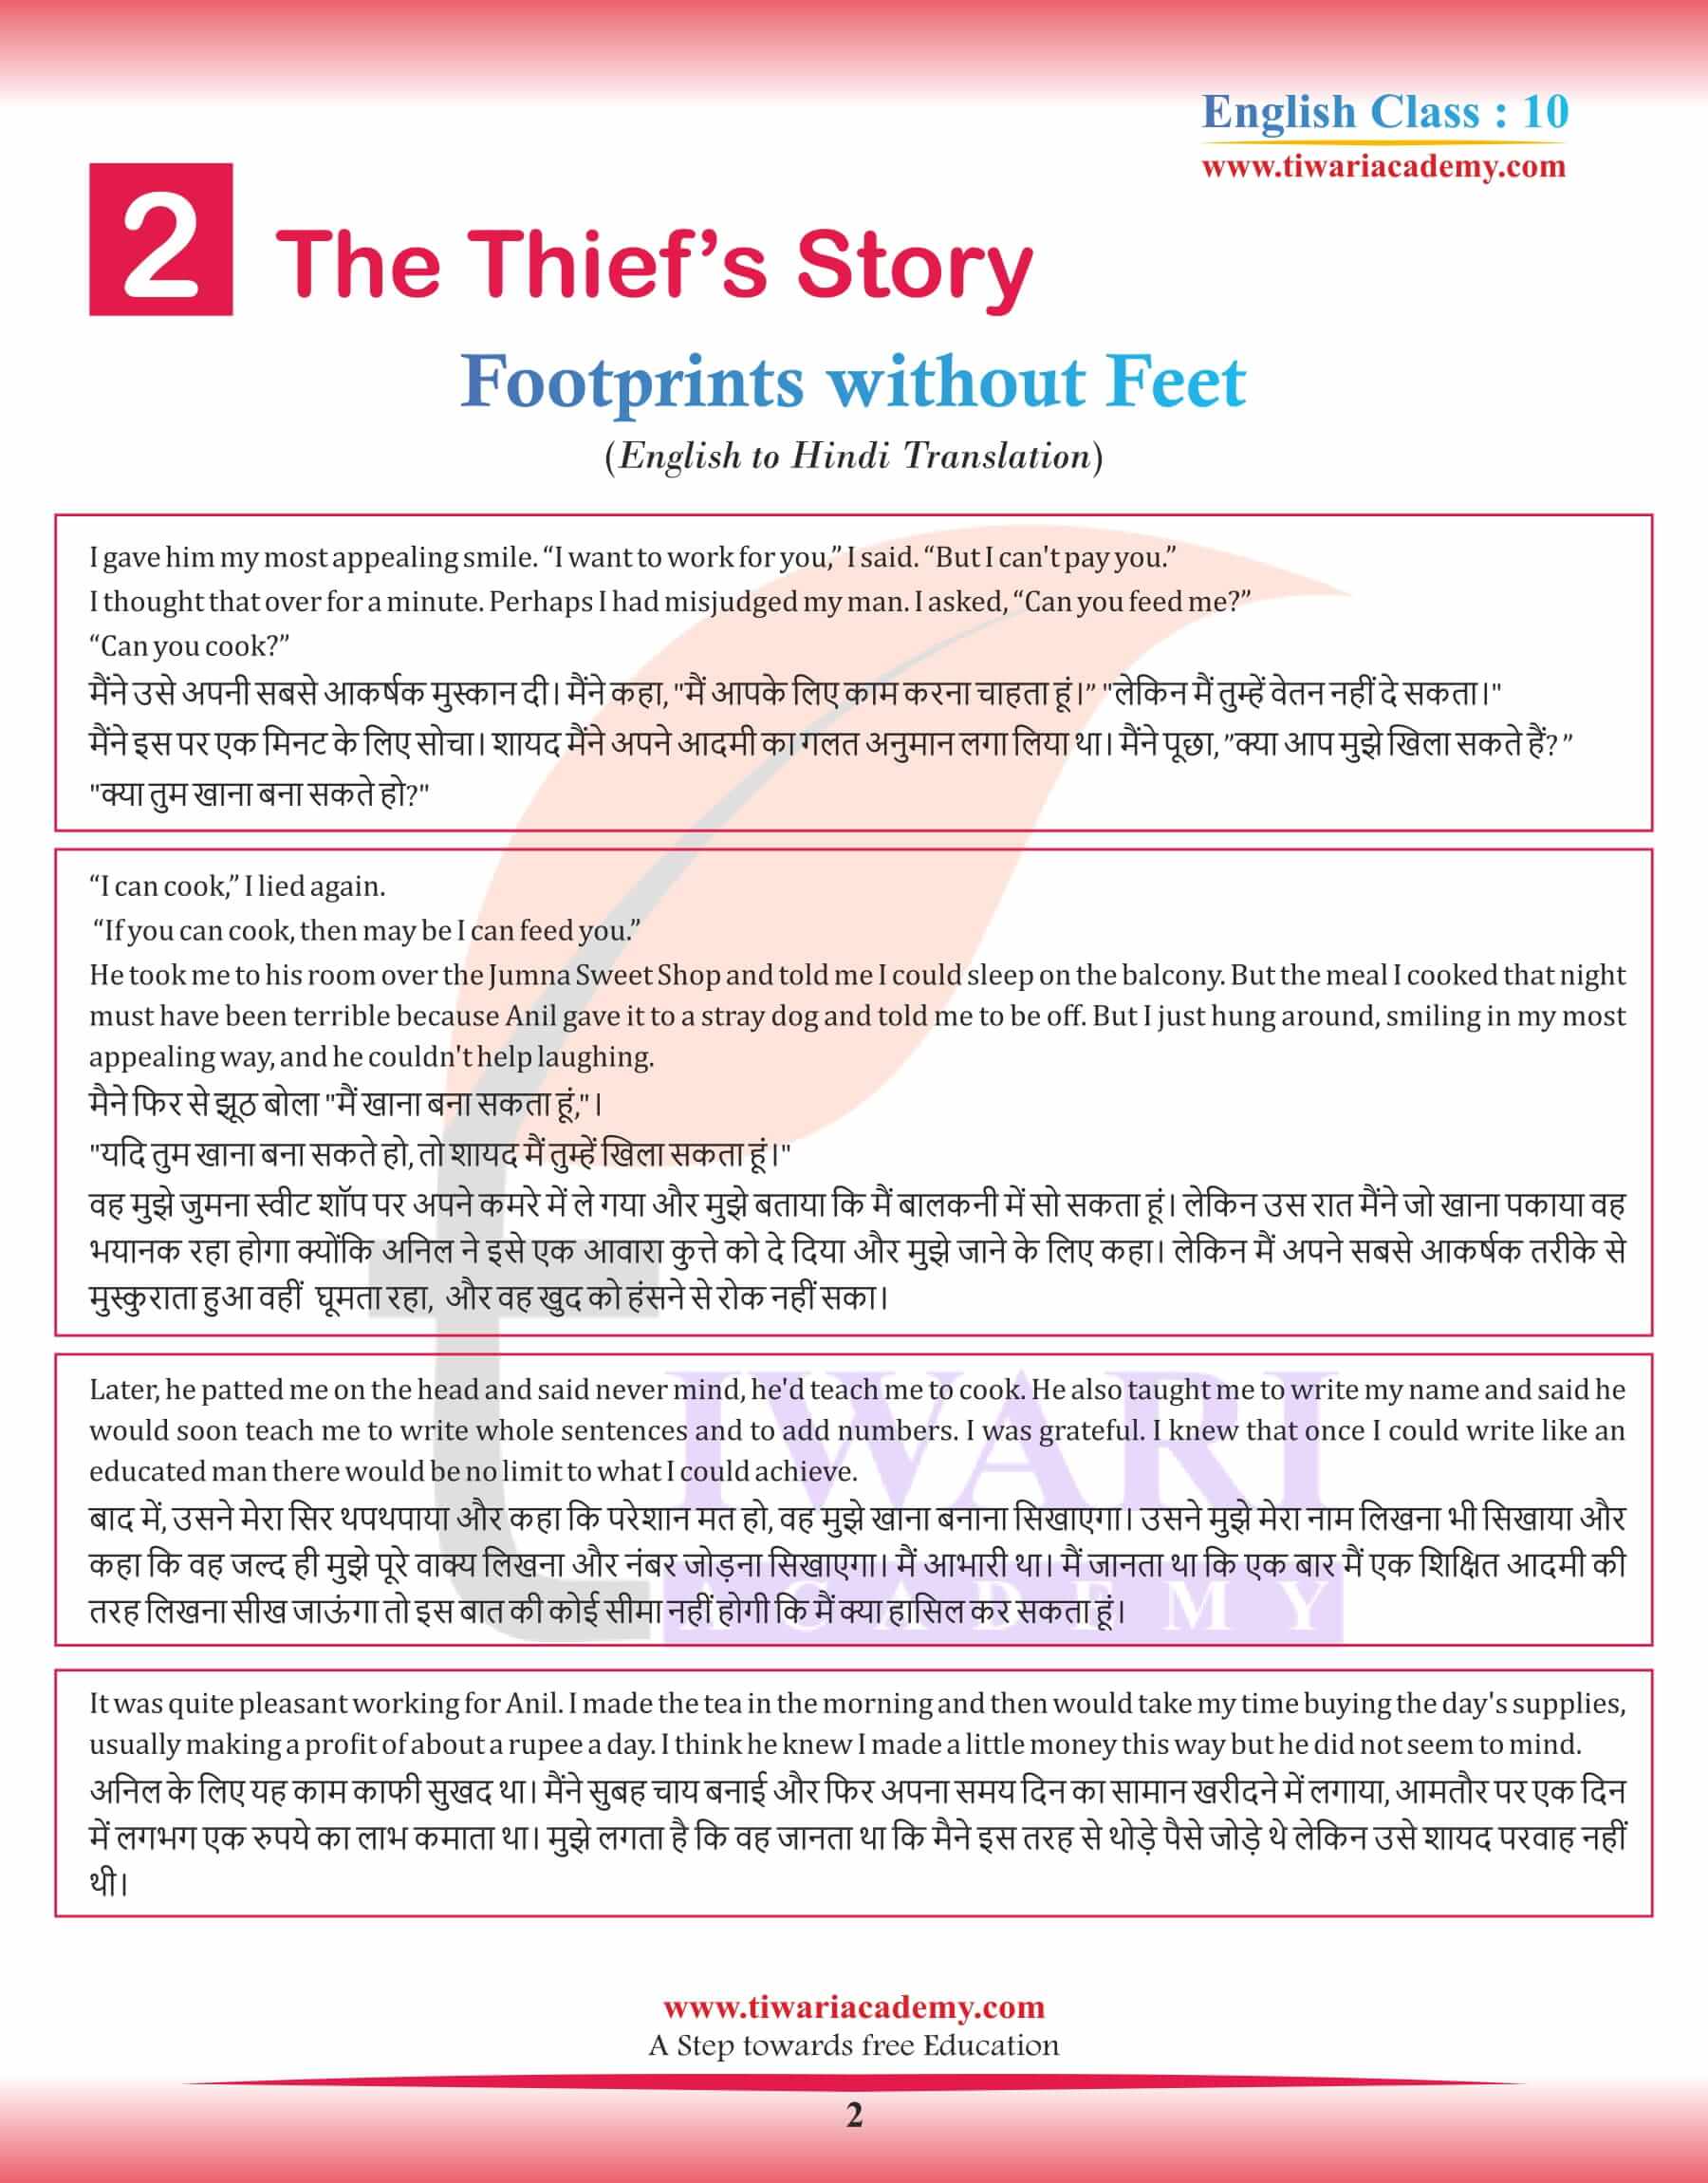 Class 10 English Supplementary Chapter 2 the Thief’s Story in Hindi